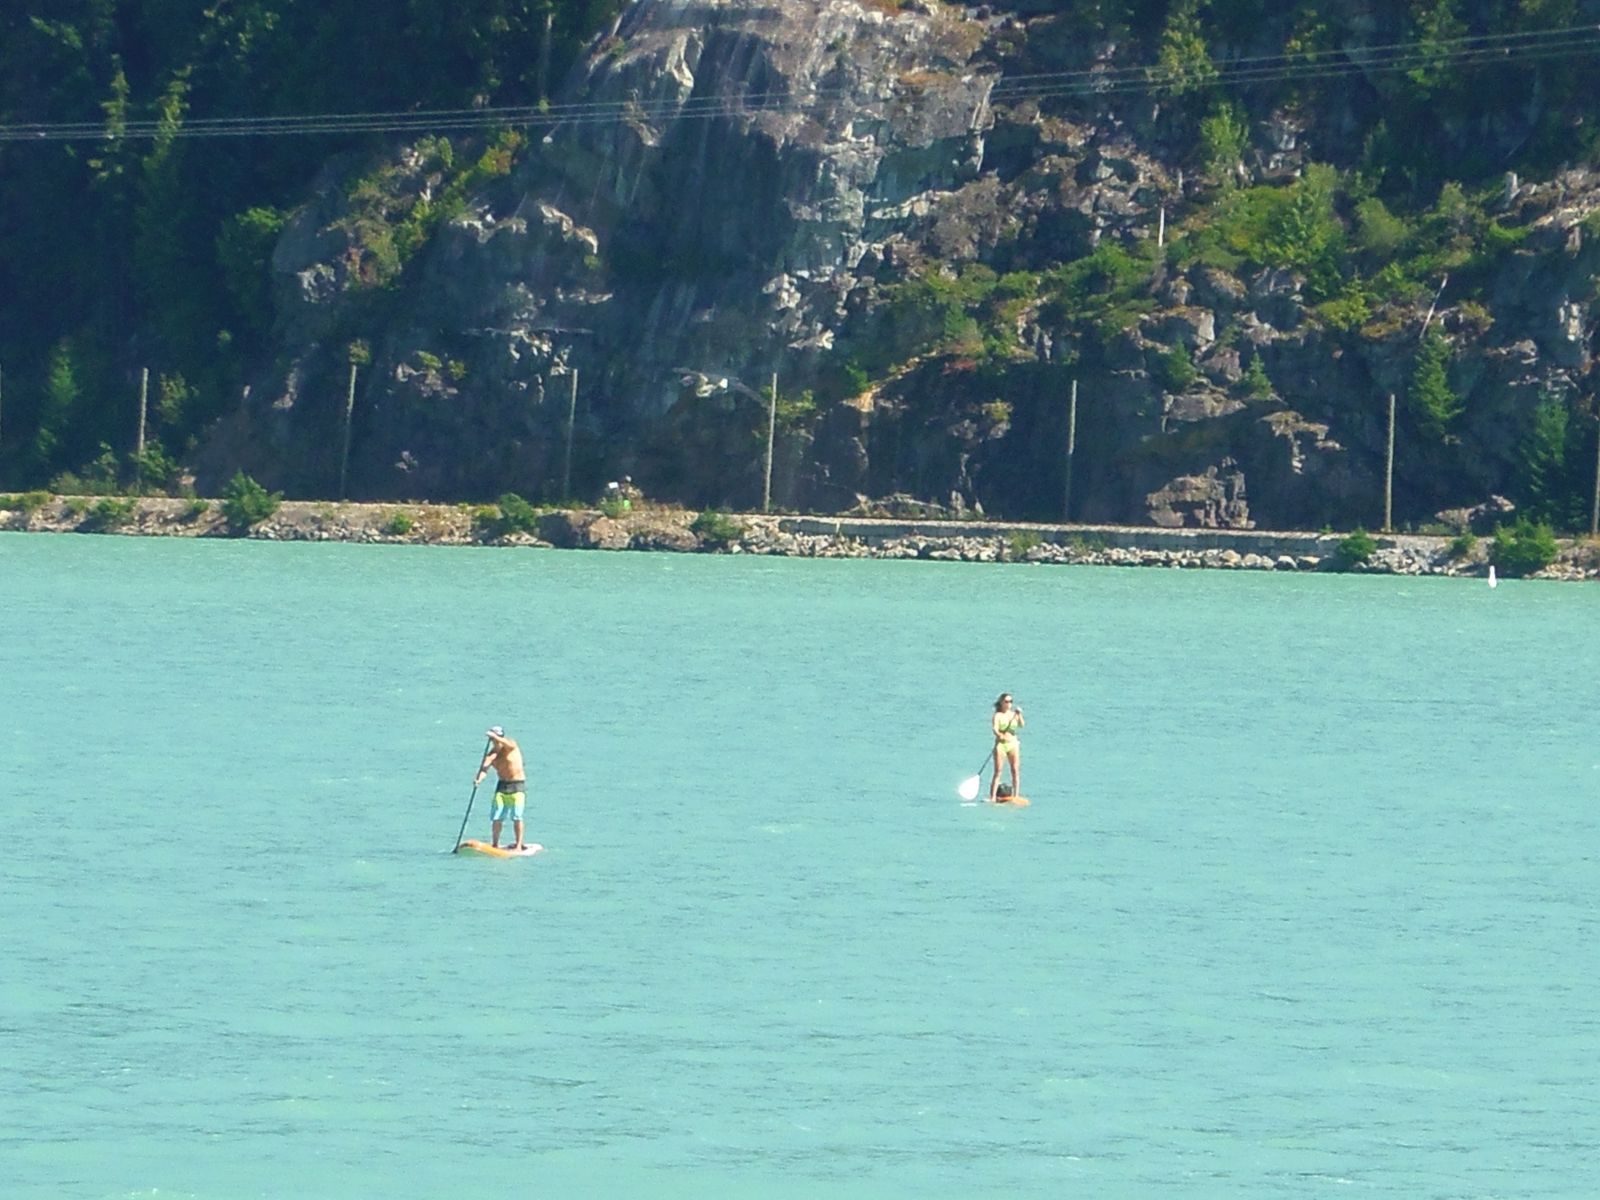 Paddle boards on Green Lake